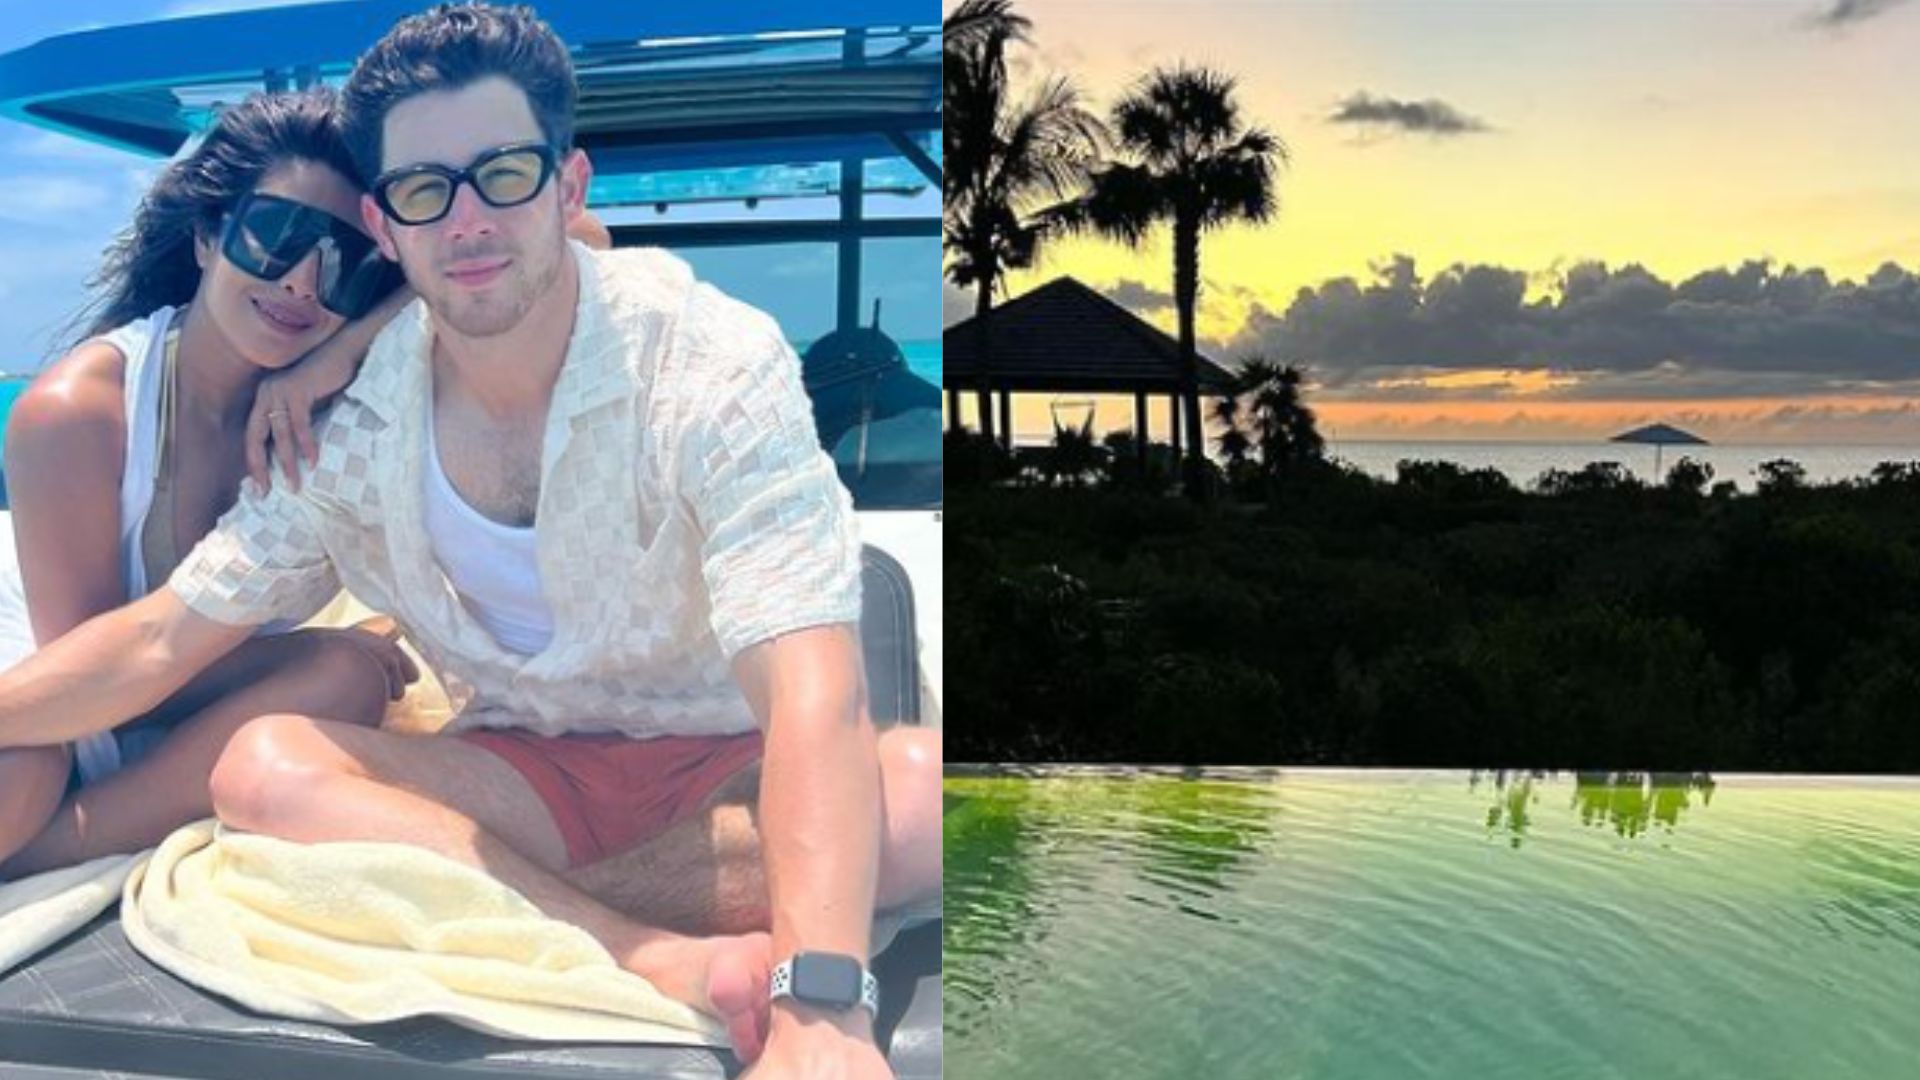 Priyanka Chopra Shares Some Pictures From Her Relaxing Beachy Vacation With Nick Jonas, Looks Like A Really Good Break From Life!